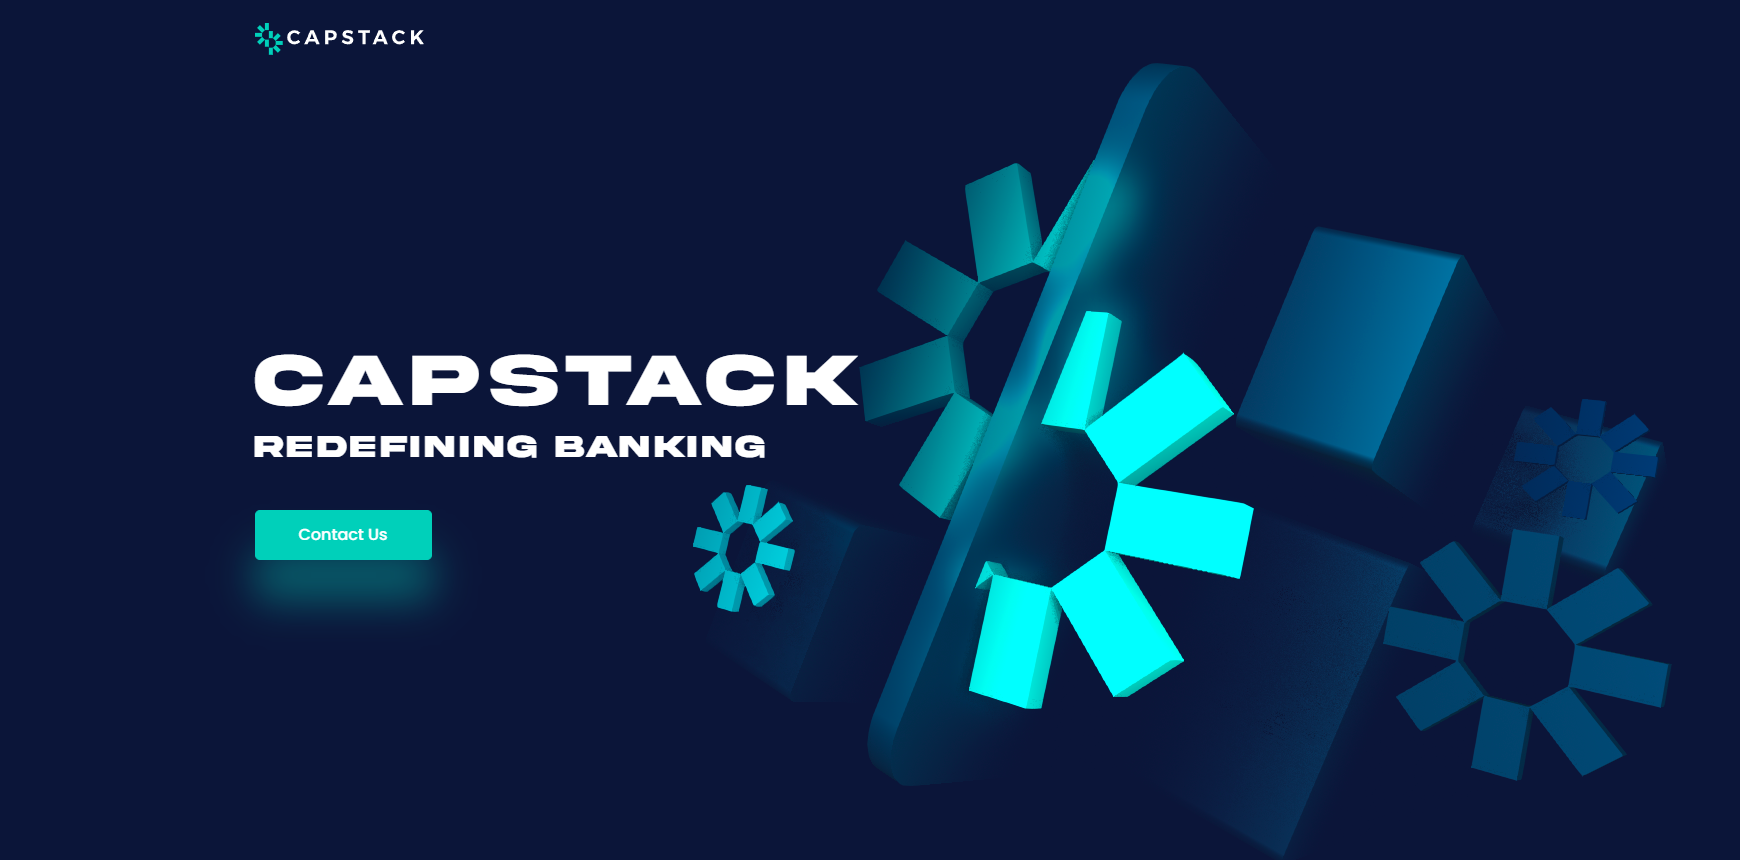 CapStack is a groundbreaking financial services startup that is reshaping the banking landscape.